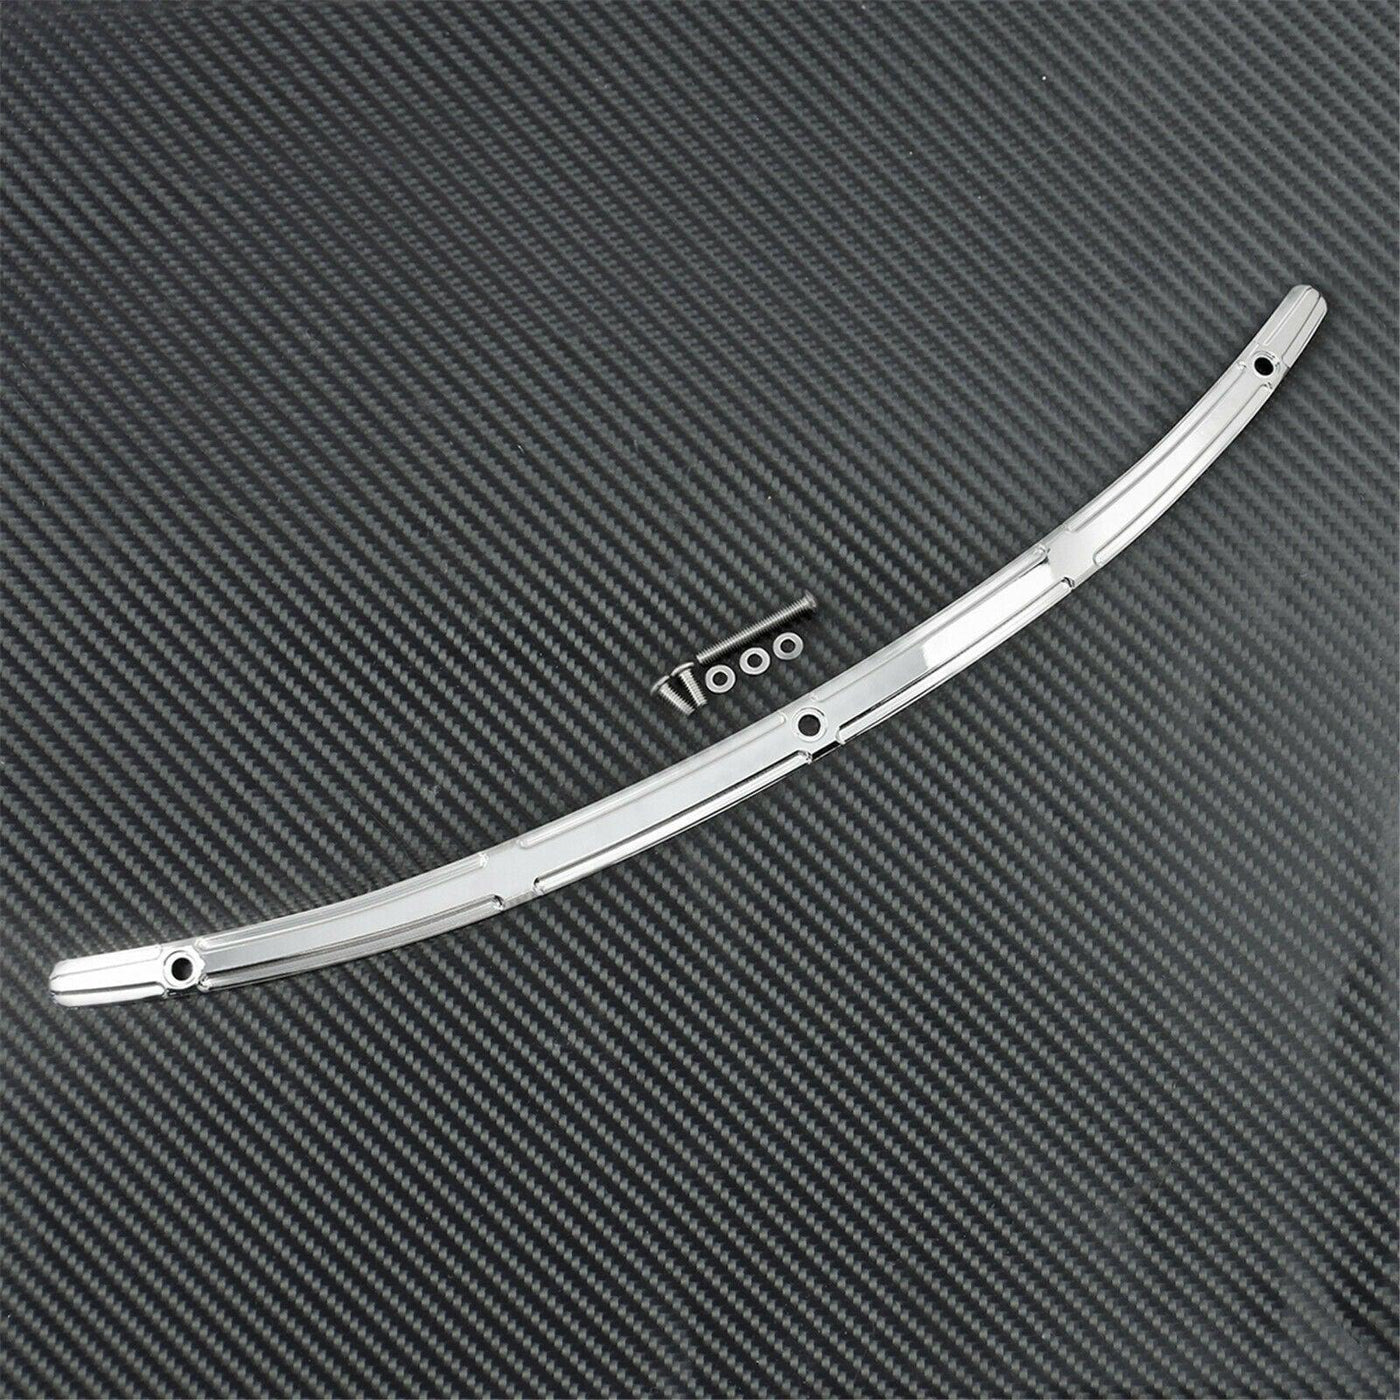 Chrome Raised Windshield Trim Fit For Harley Touring Glide Ultra Limited 2014-20 - Moto Life Products